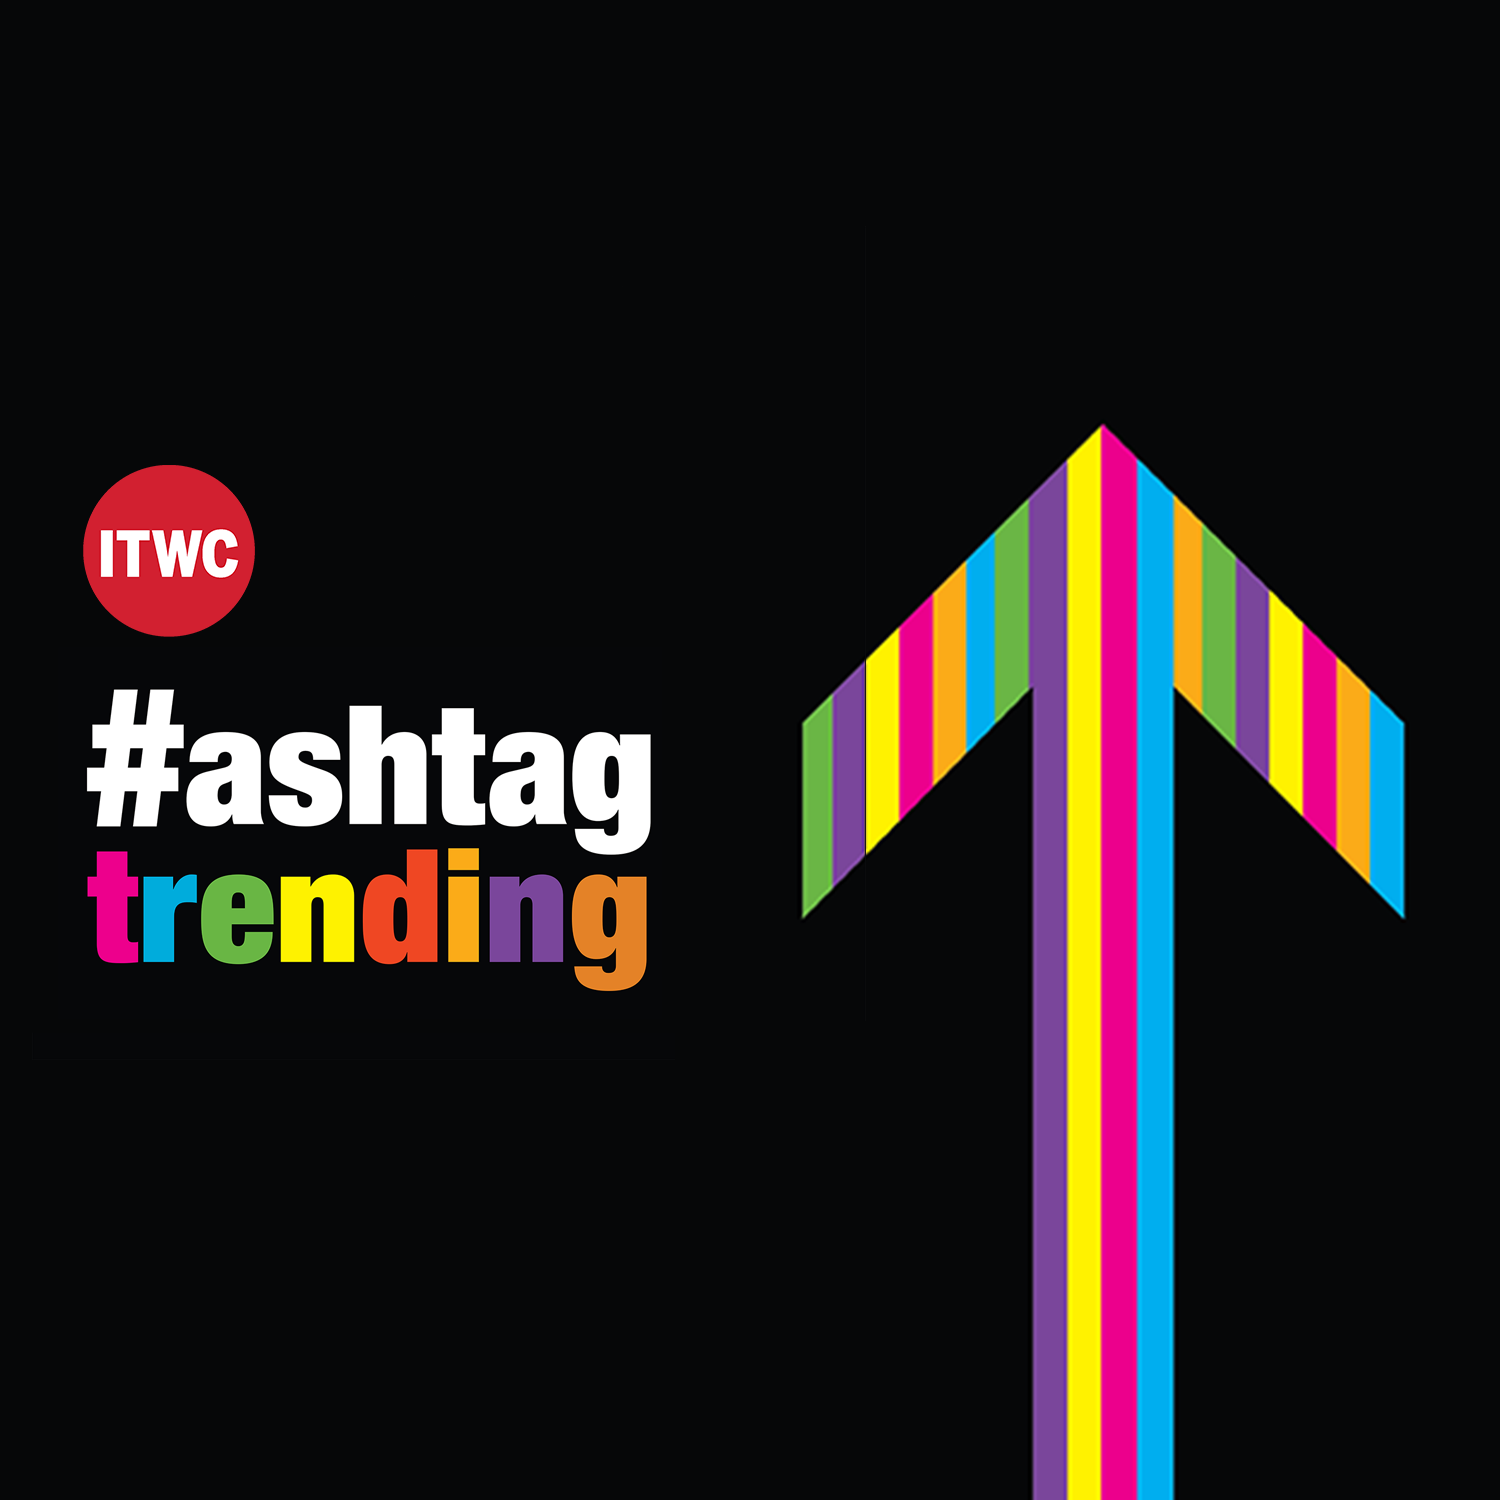 Hashtag Trending, May 3, 2021 – Big Tech’s ‘bonkers’ dominance; Another Amazon fulfillment …